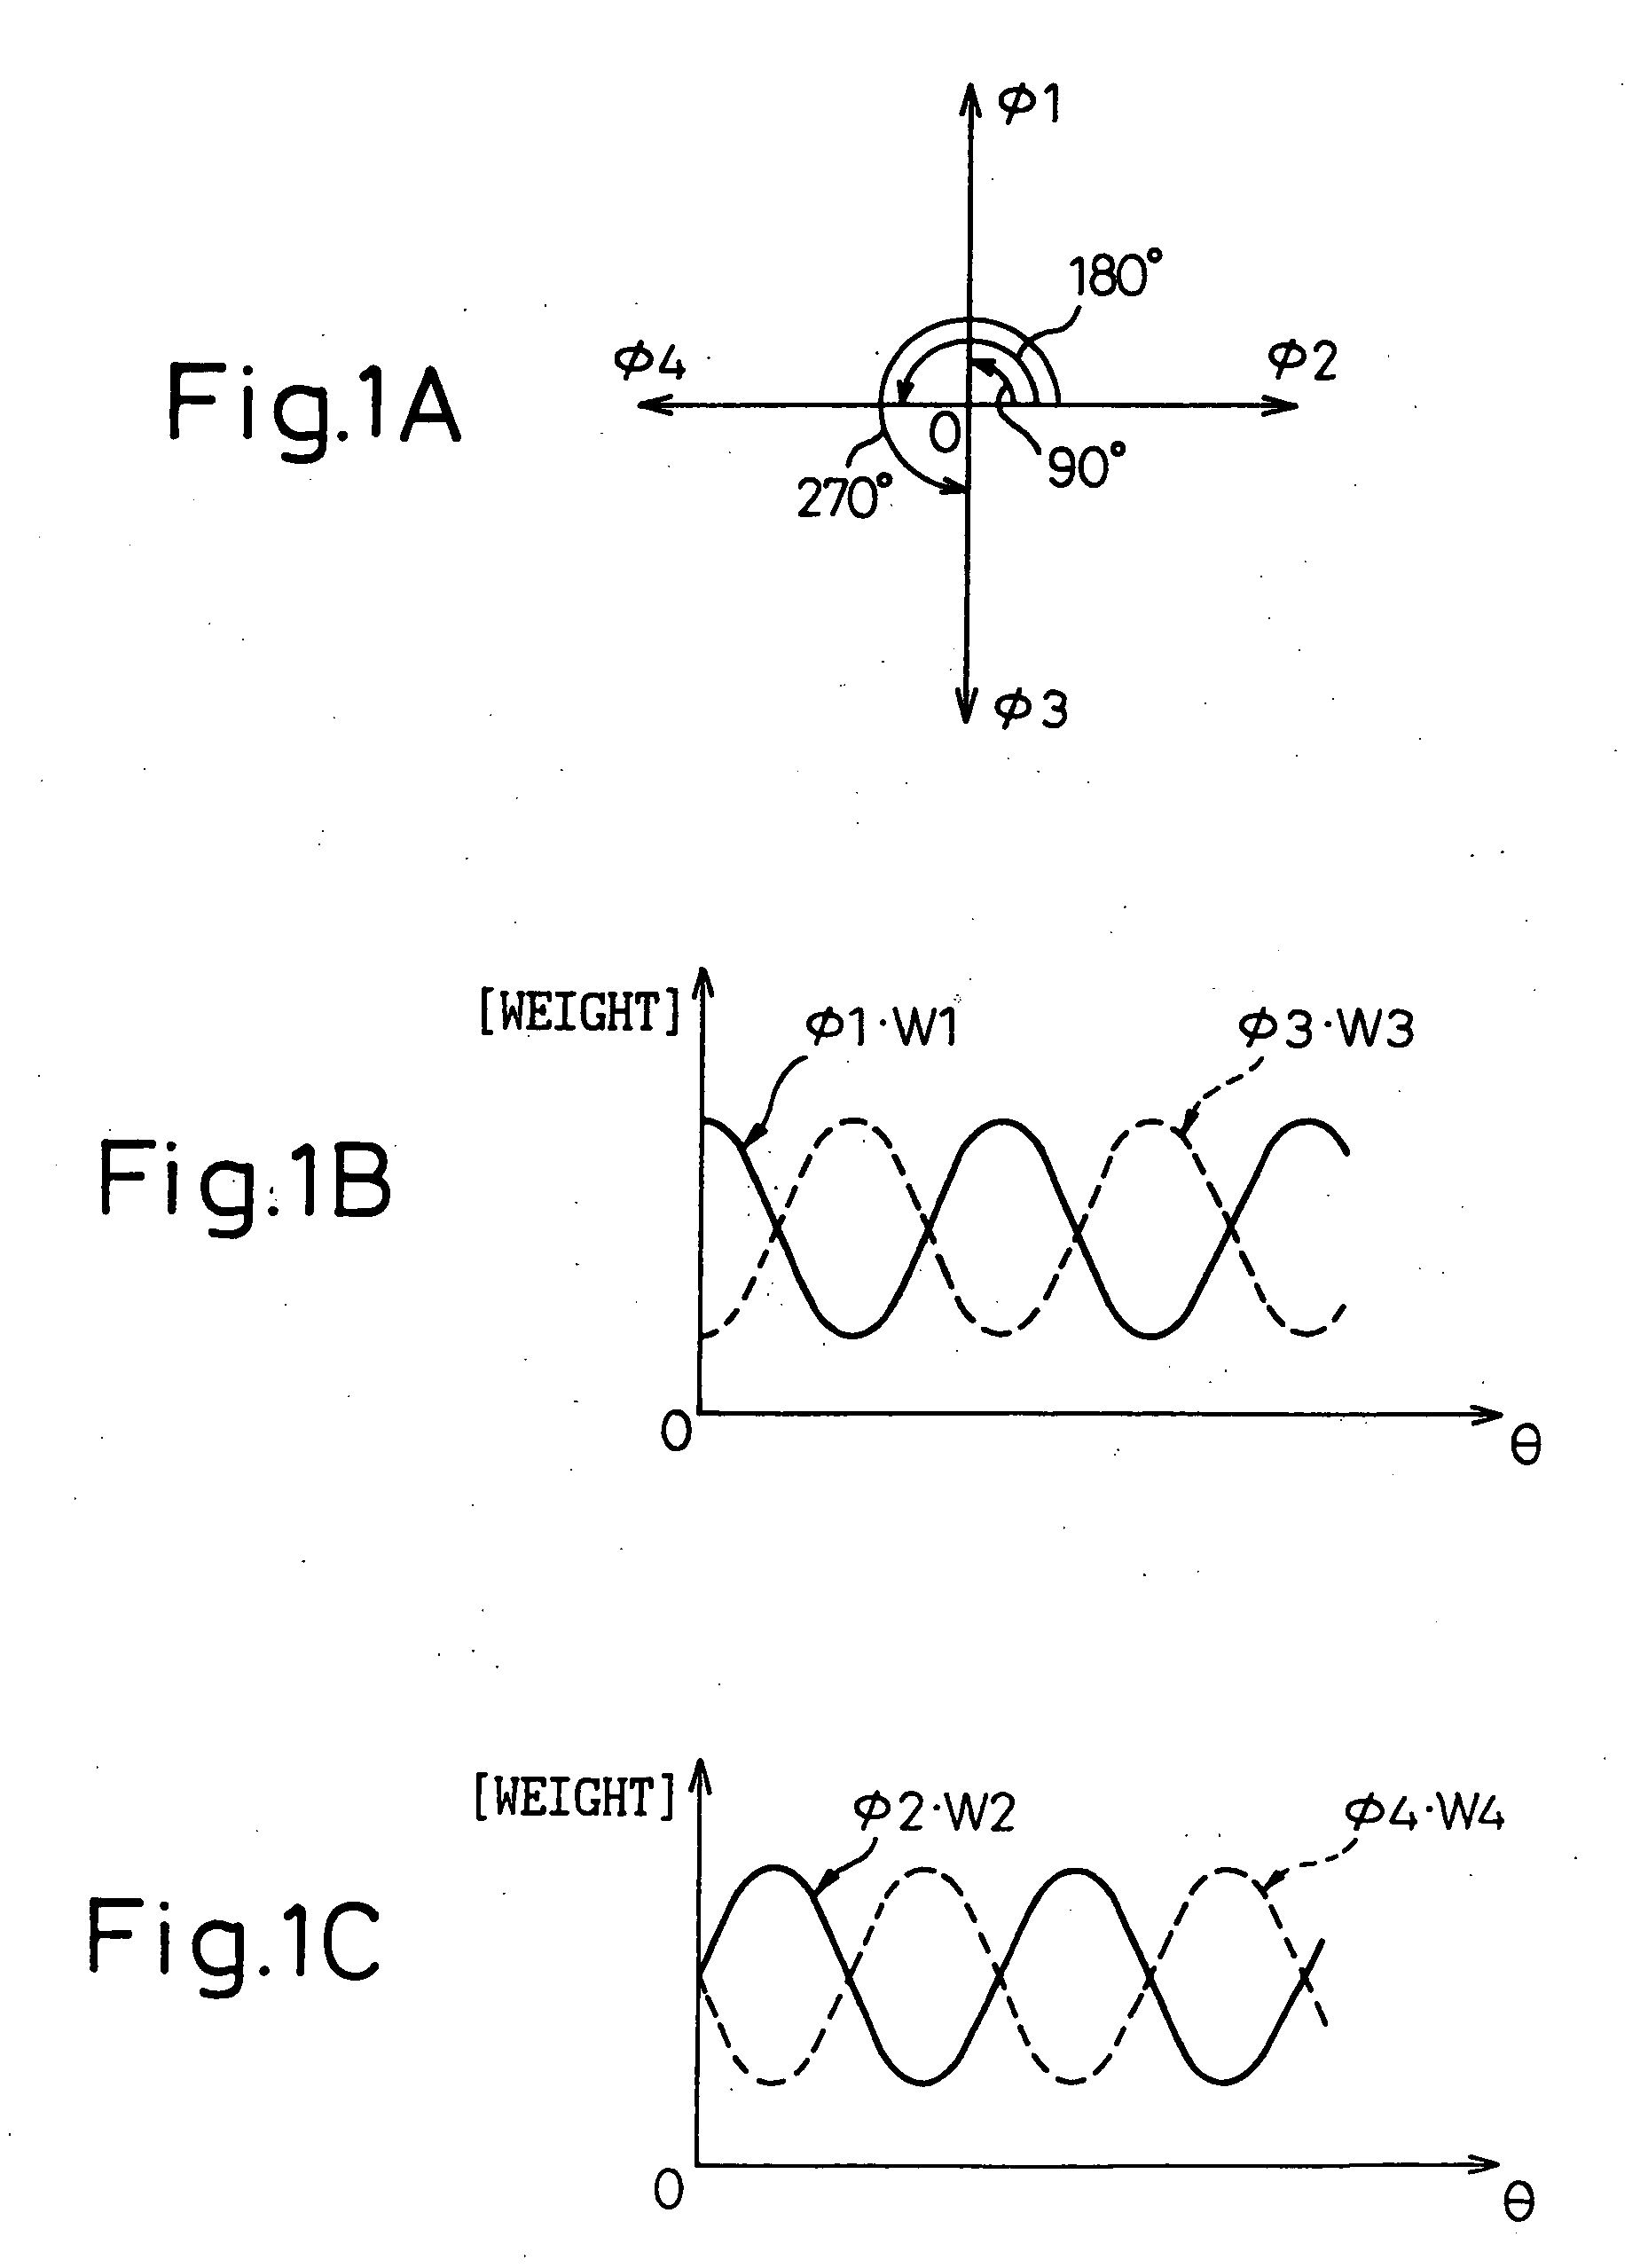 Phase-combining circuit and timing signal generator circuit for carrying out a high-speed signal transmission